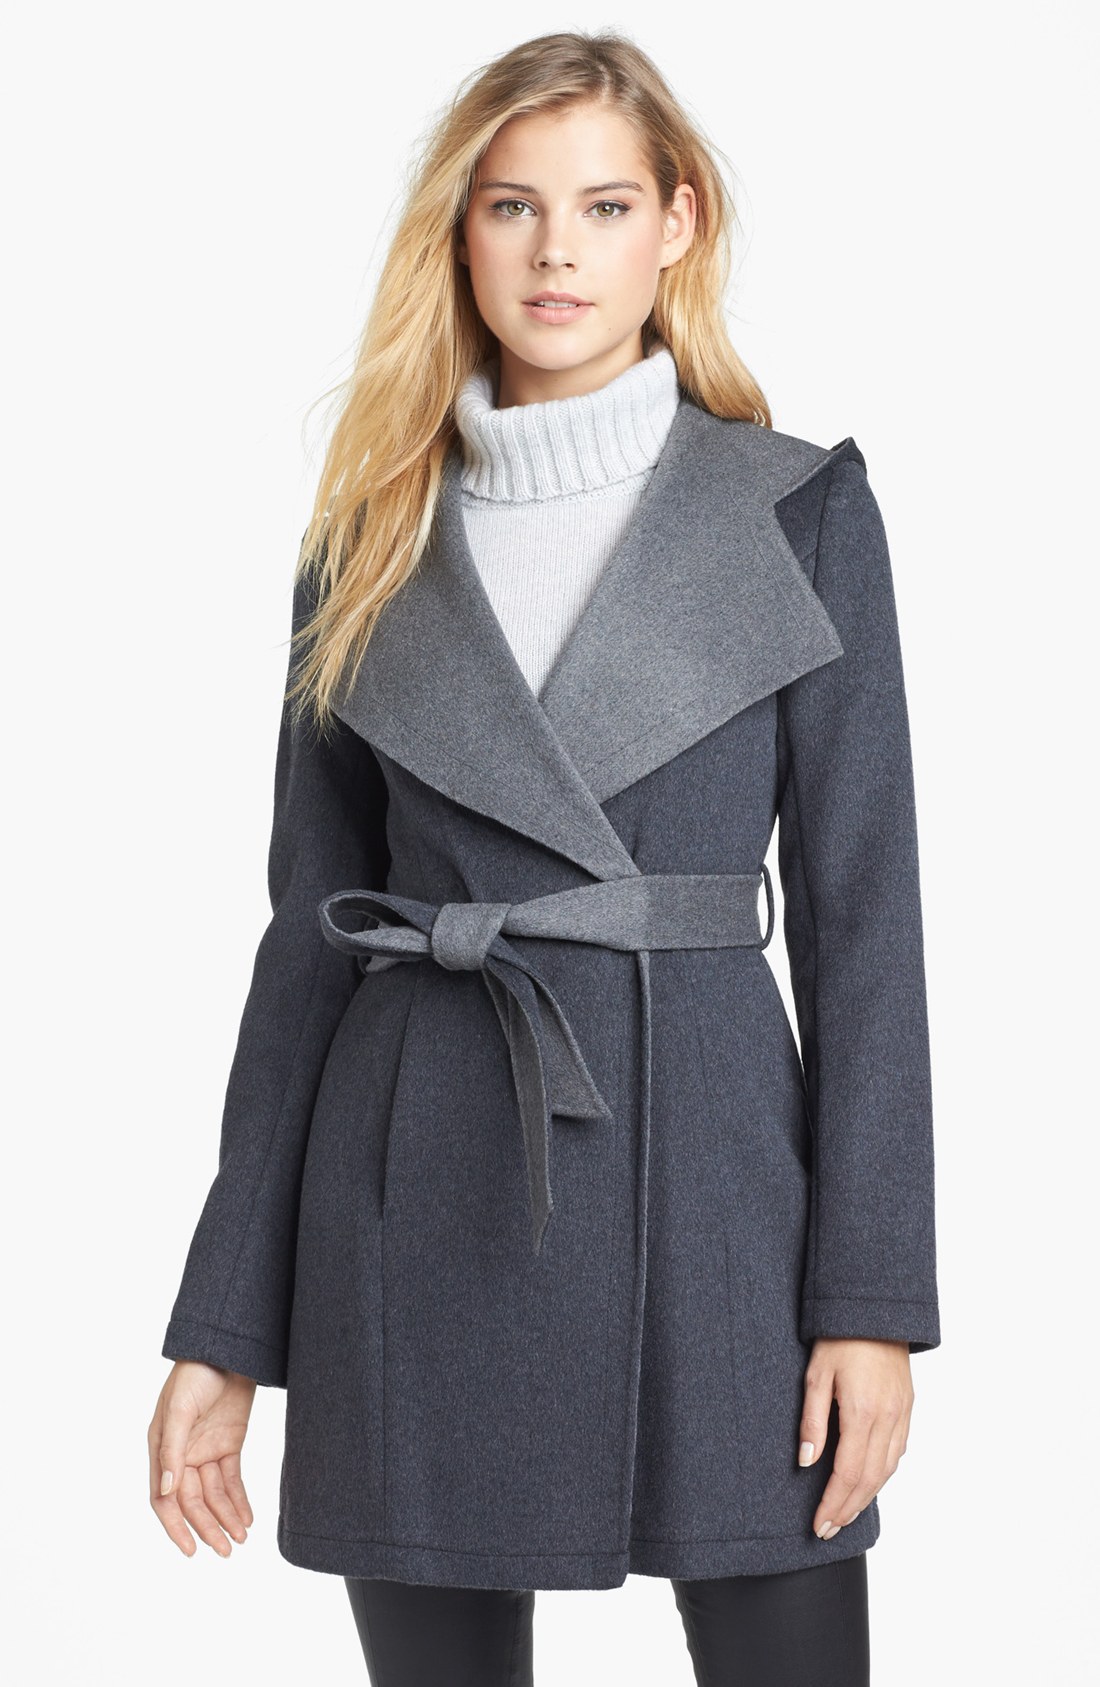 Laundry By Shelli Segal Hooded Double Face Wrap Coat in Gray (Charcoal ...